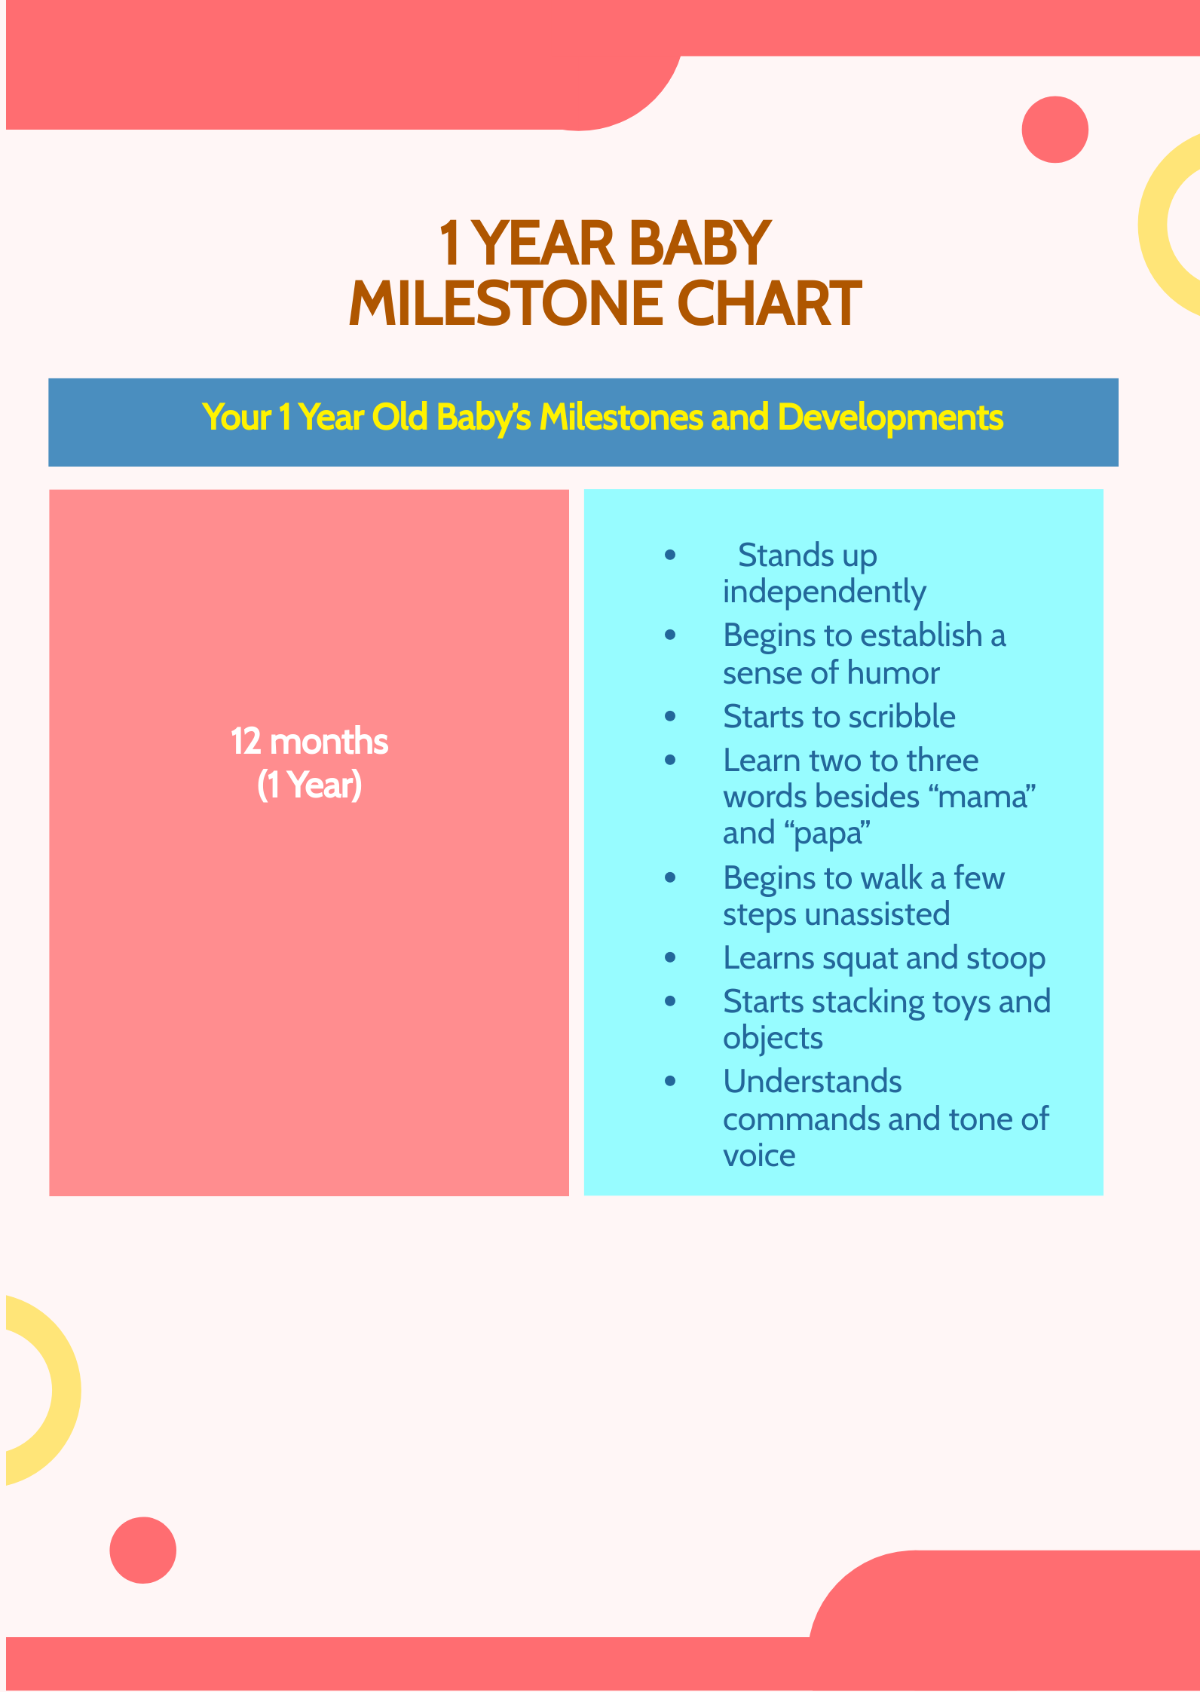 1 Year Baby Milestone Chart Template - Edit Online & Download Example ...